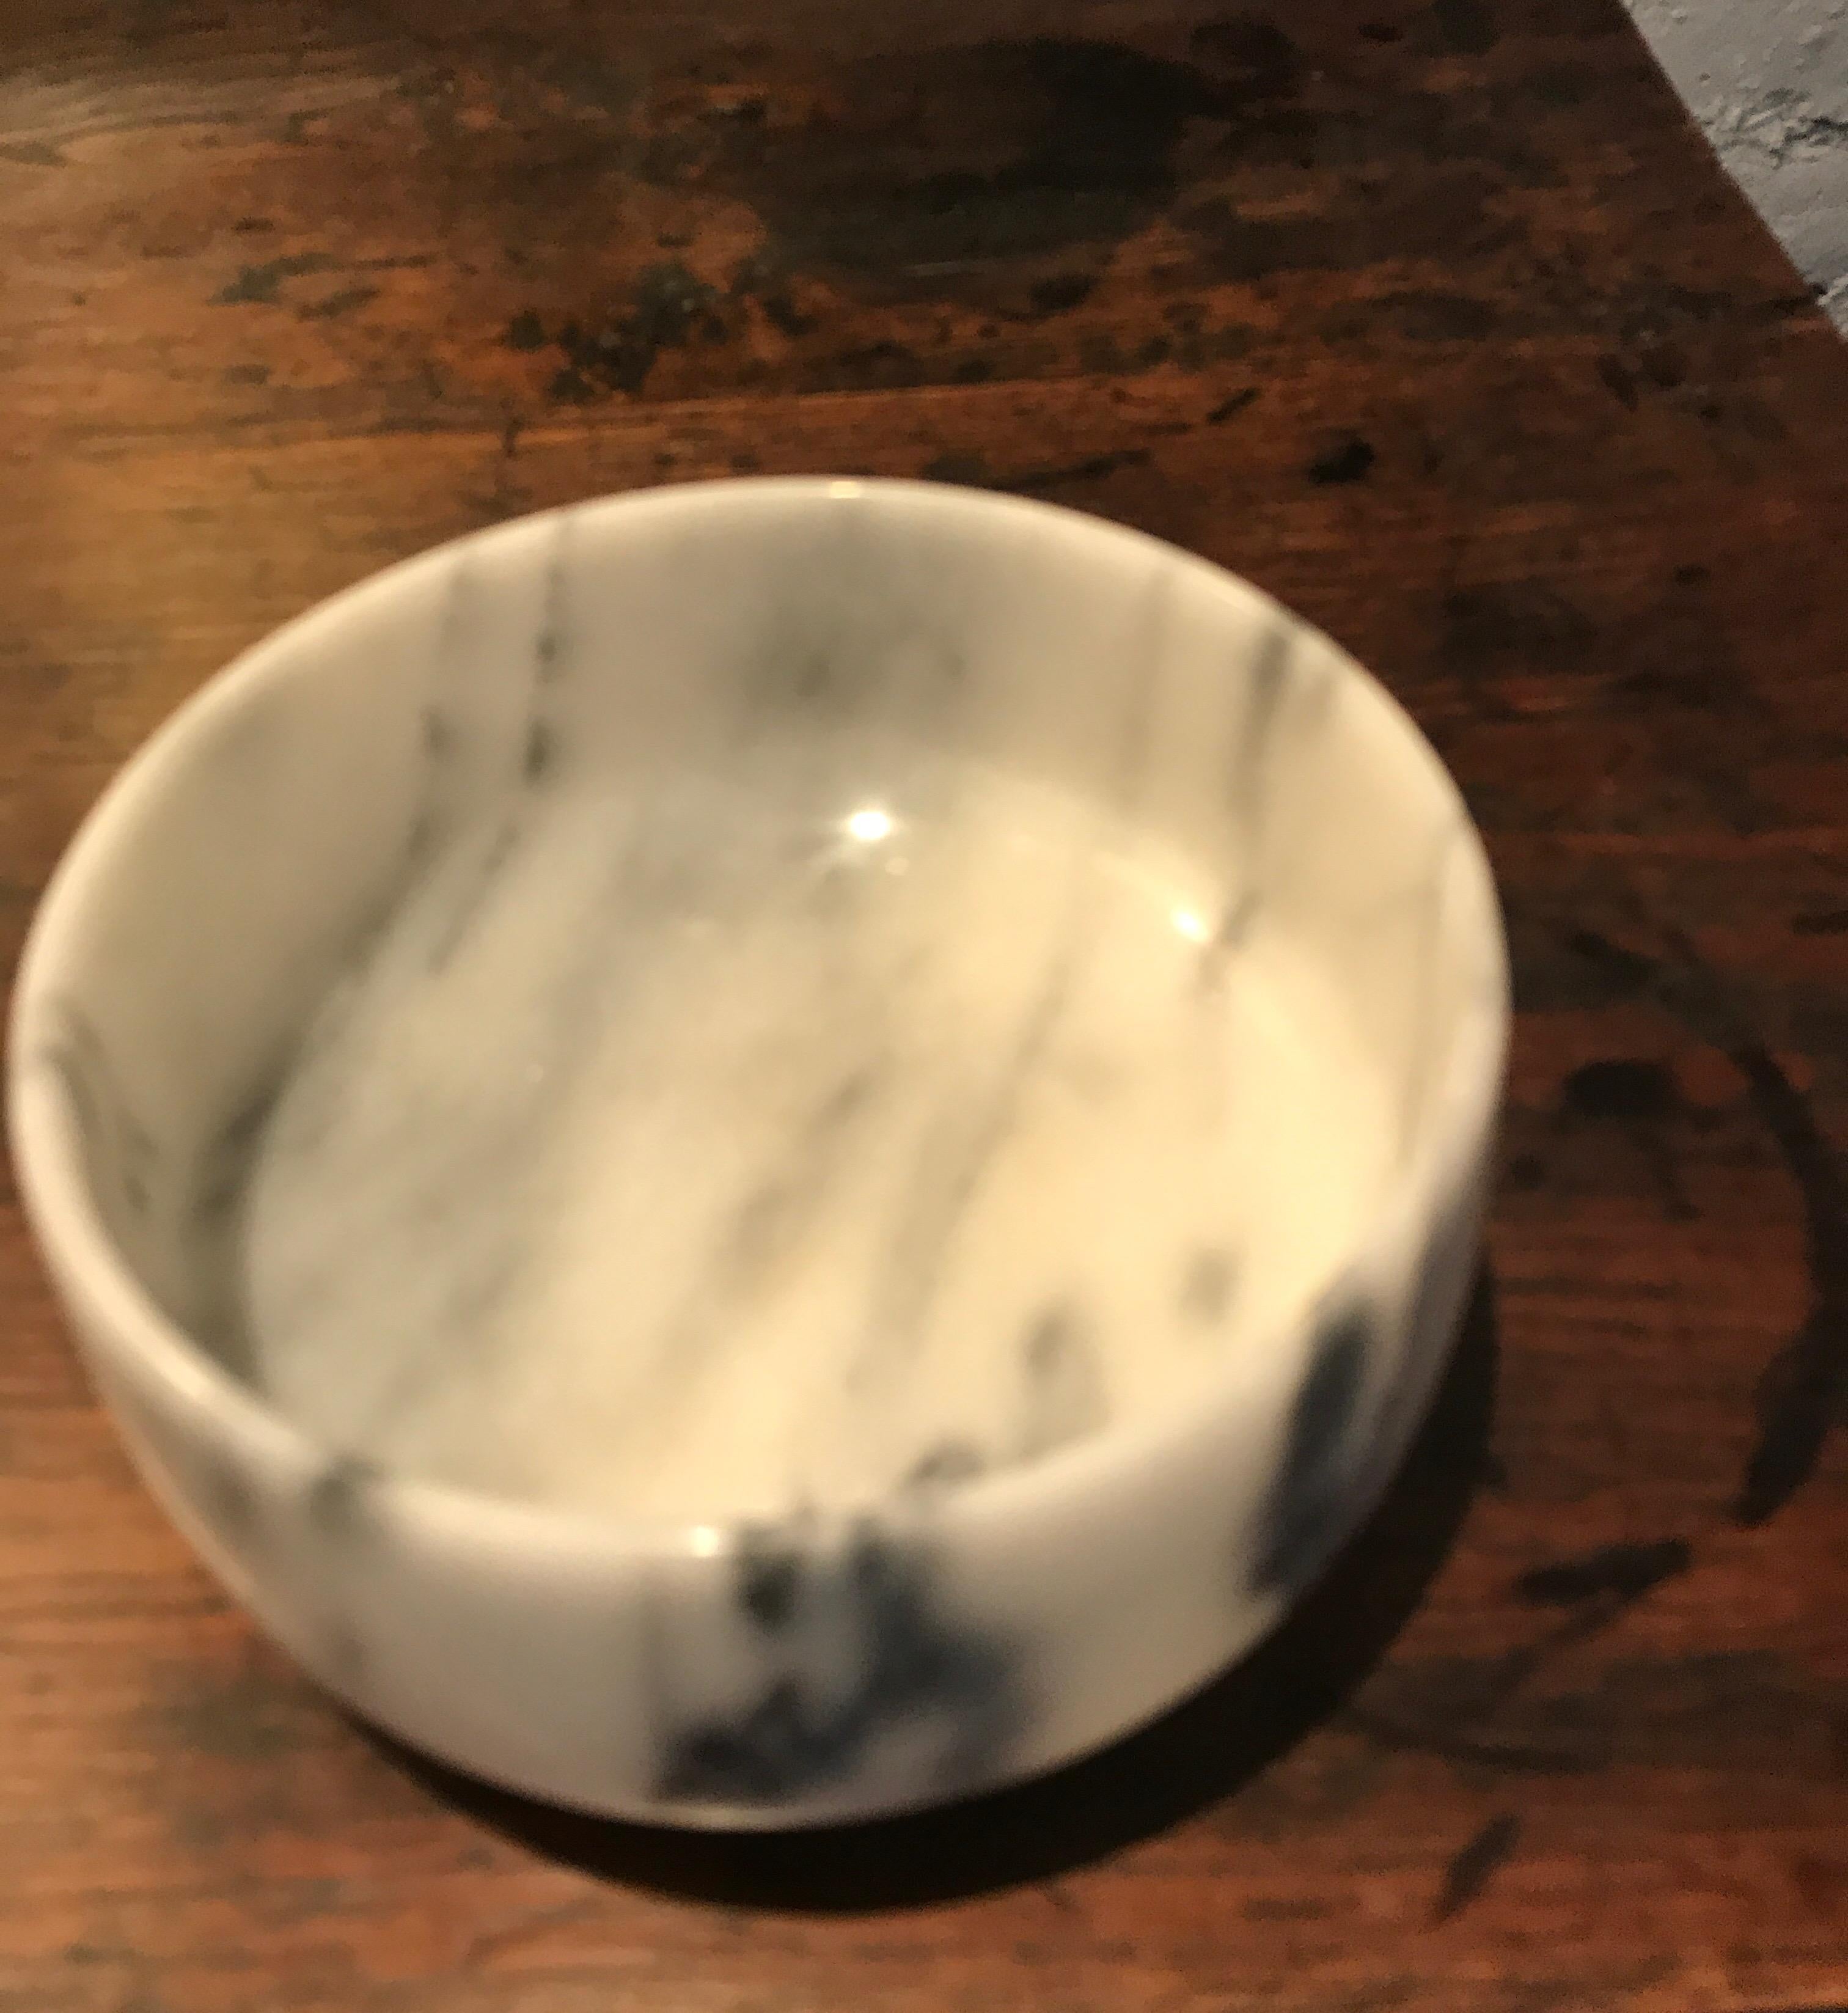 Carved white Carrara marble Italian bowl in the style of Angelo Mangiarotti.
Fantastic tabletop decorative object.
The bowl is in very good overall condition.
There is a very small chip on the rime.
Please see images.